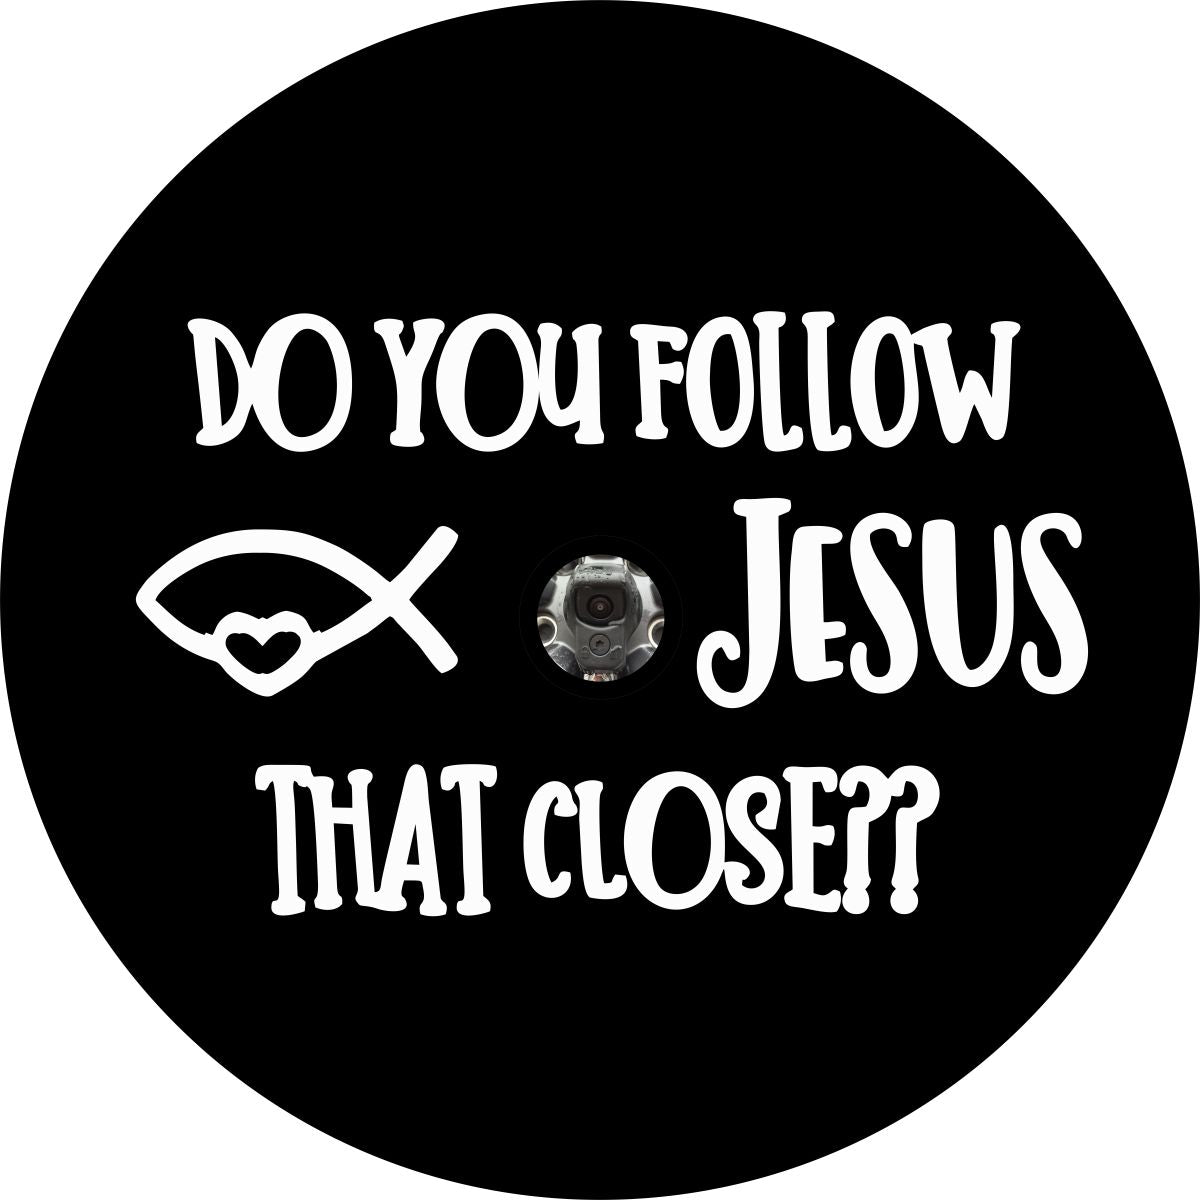 Example design of a black vinyl spare tire cover with the saying 'do you follow jesus that close' and a center hole for a backup camera on your vehicle's spare wheel.